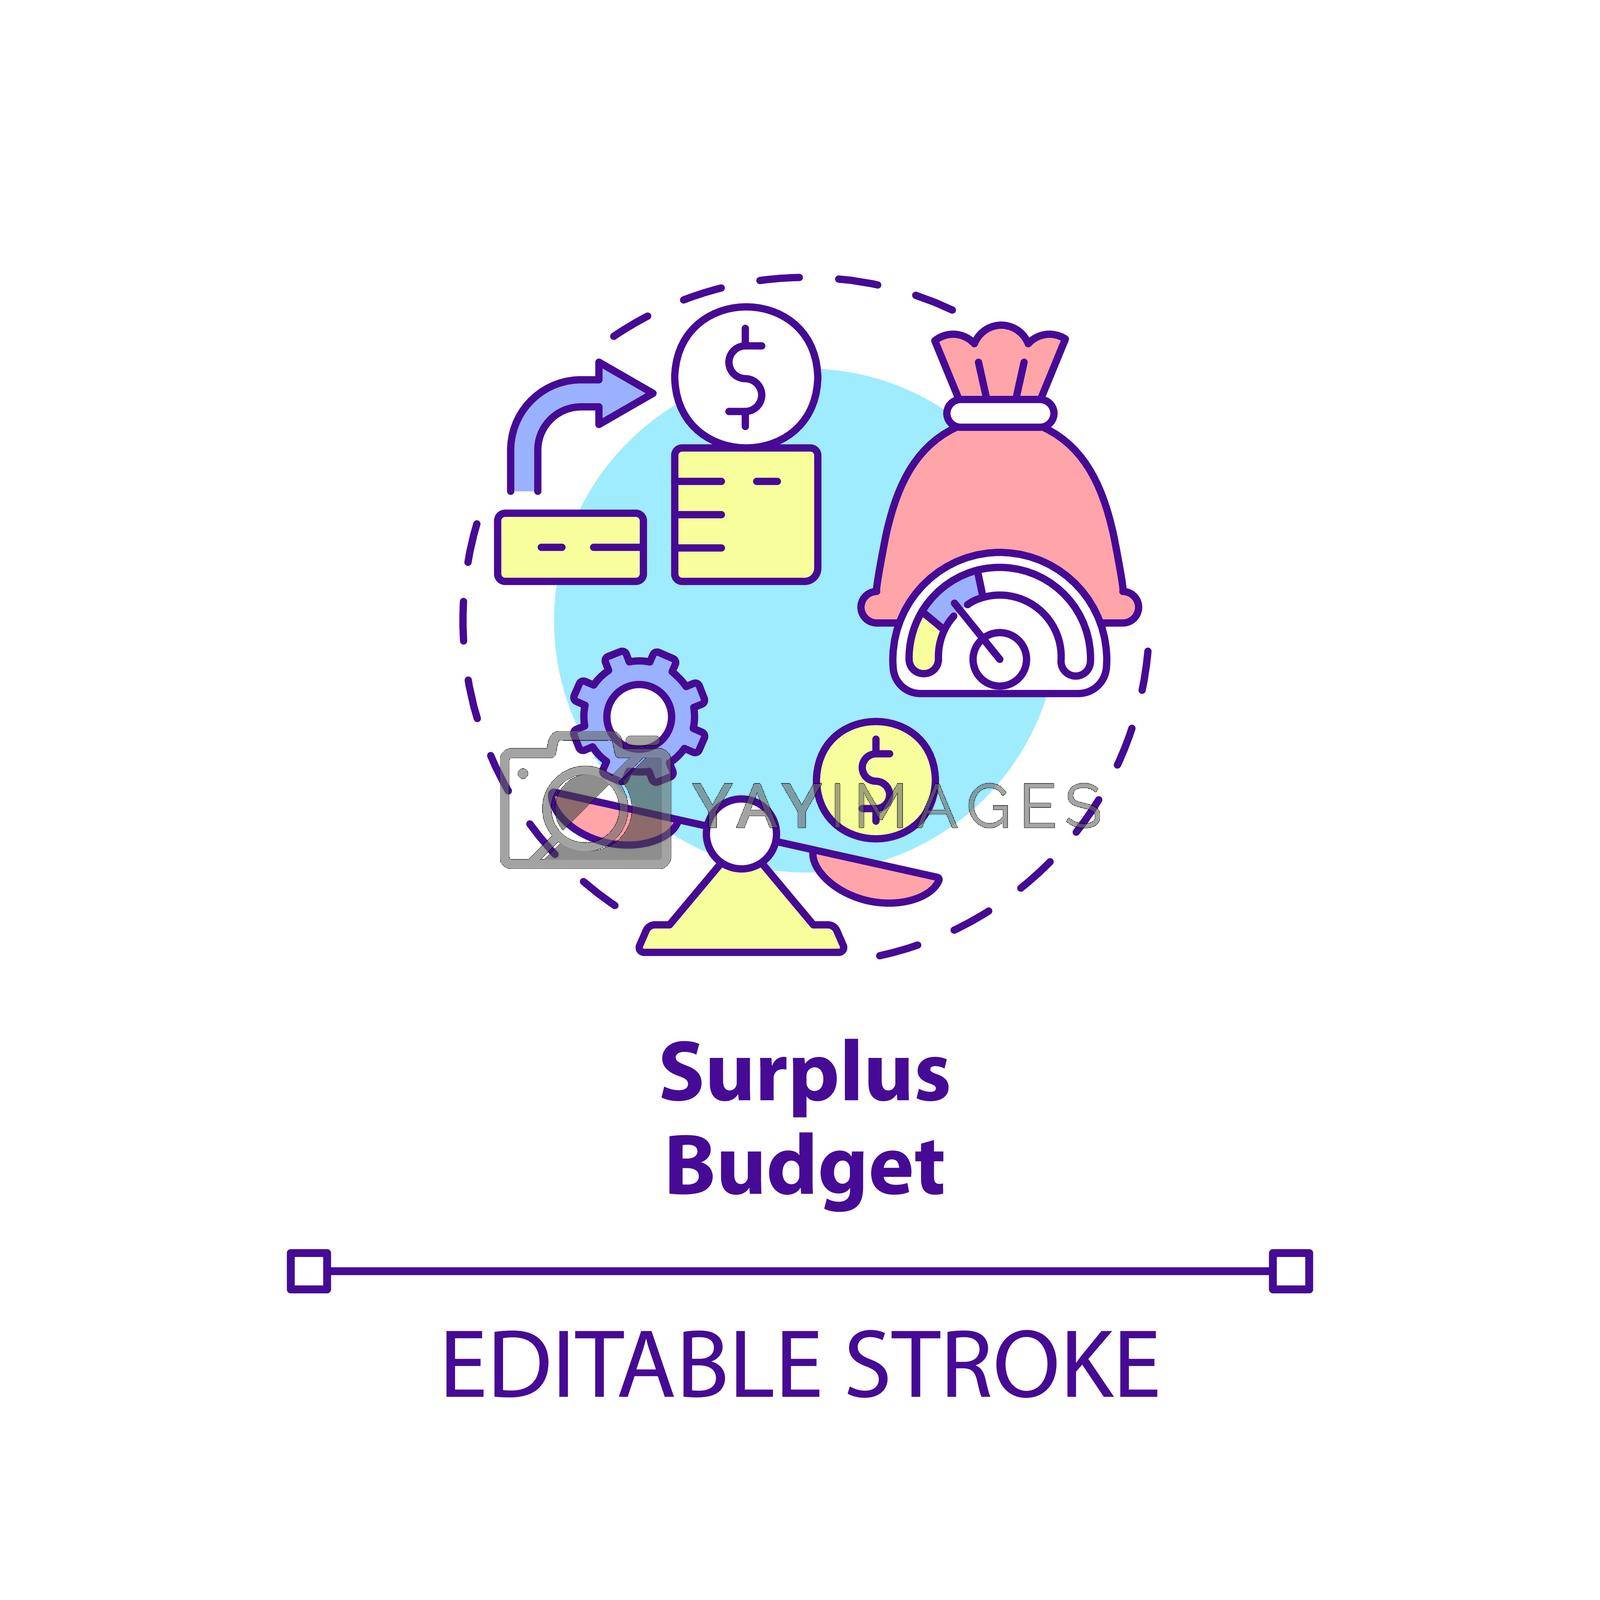 Royalty free image of Surplus budget concept icon by bsd